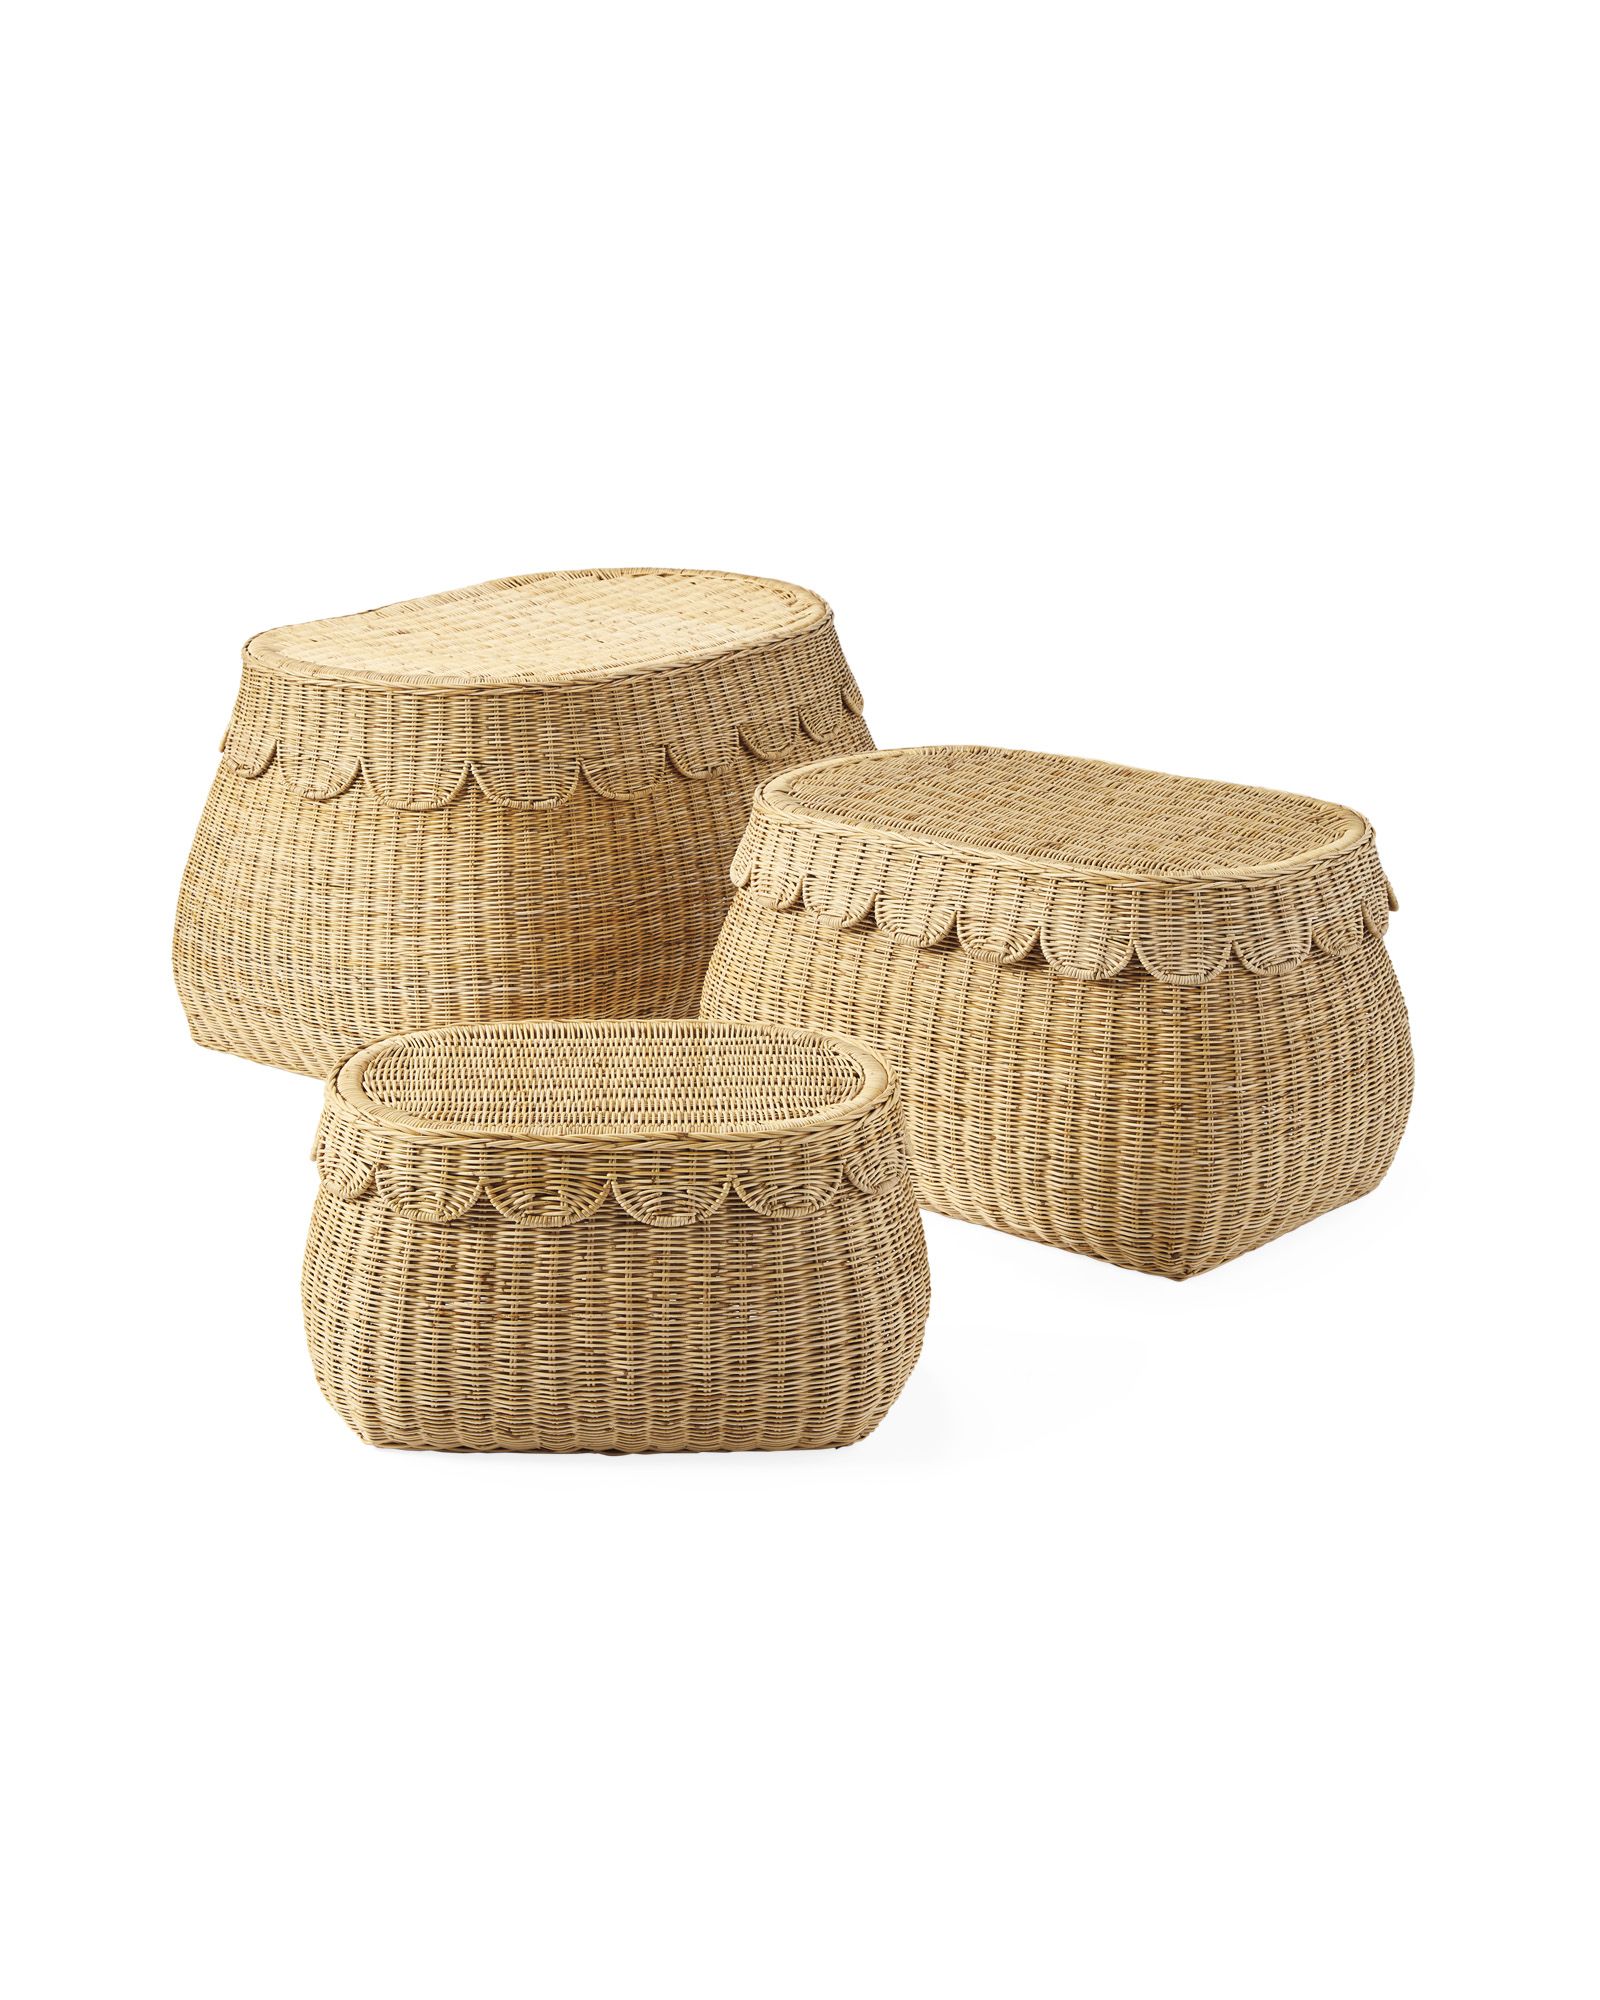 Scallop Basket | Serena and Lily